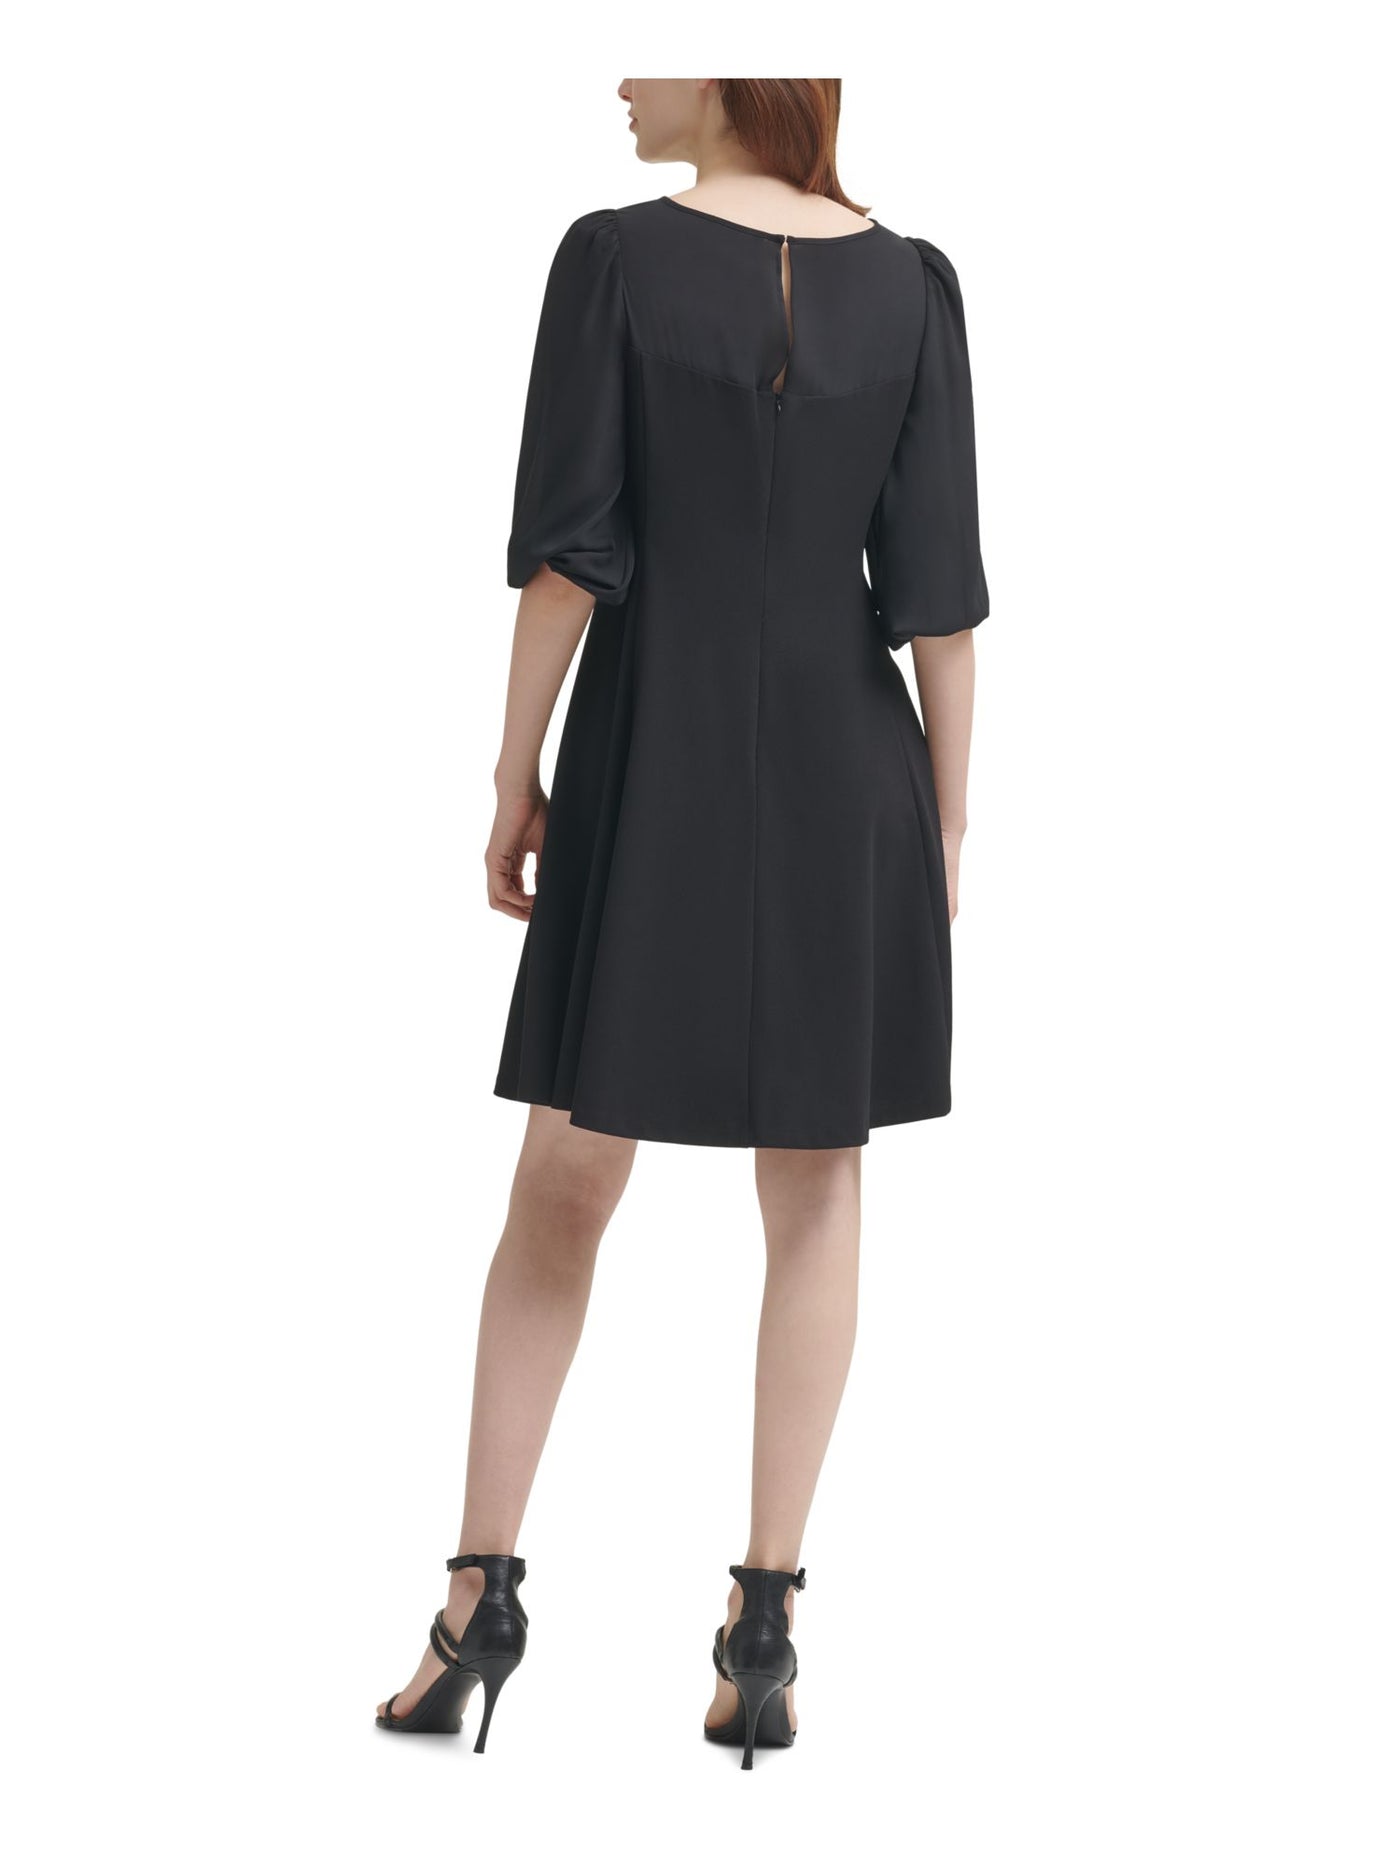 DKNY Womens Black Zippered Sheer Keyhole Back Unlined Pouf Sleeve Round Neck Above The Knee Cocktail Fit + Flare Dress 6